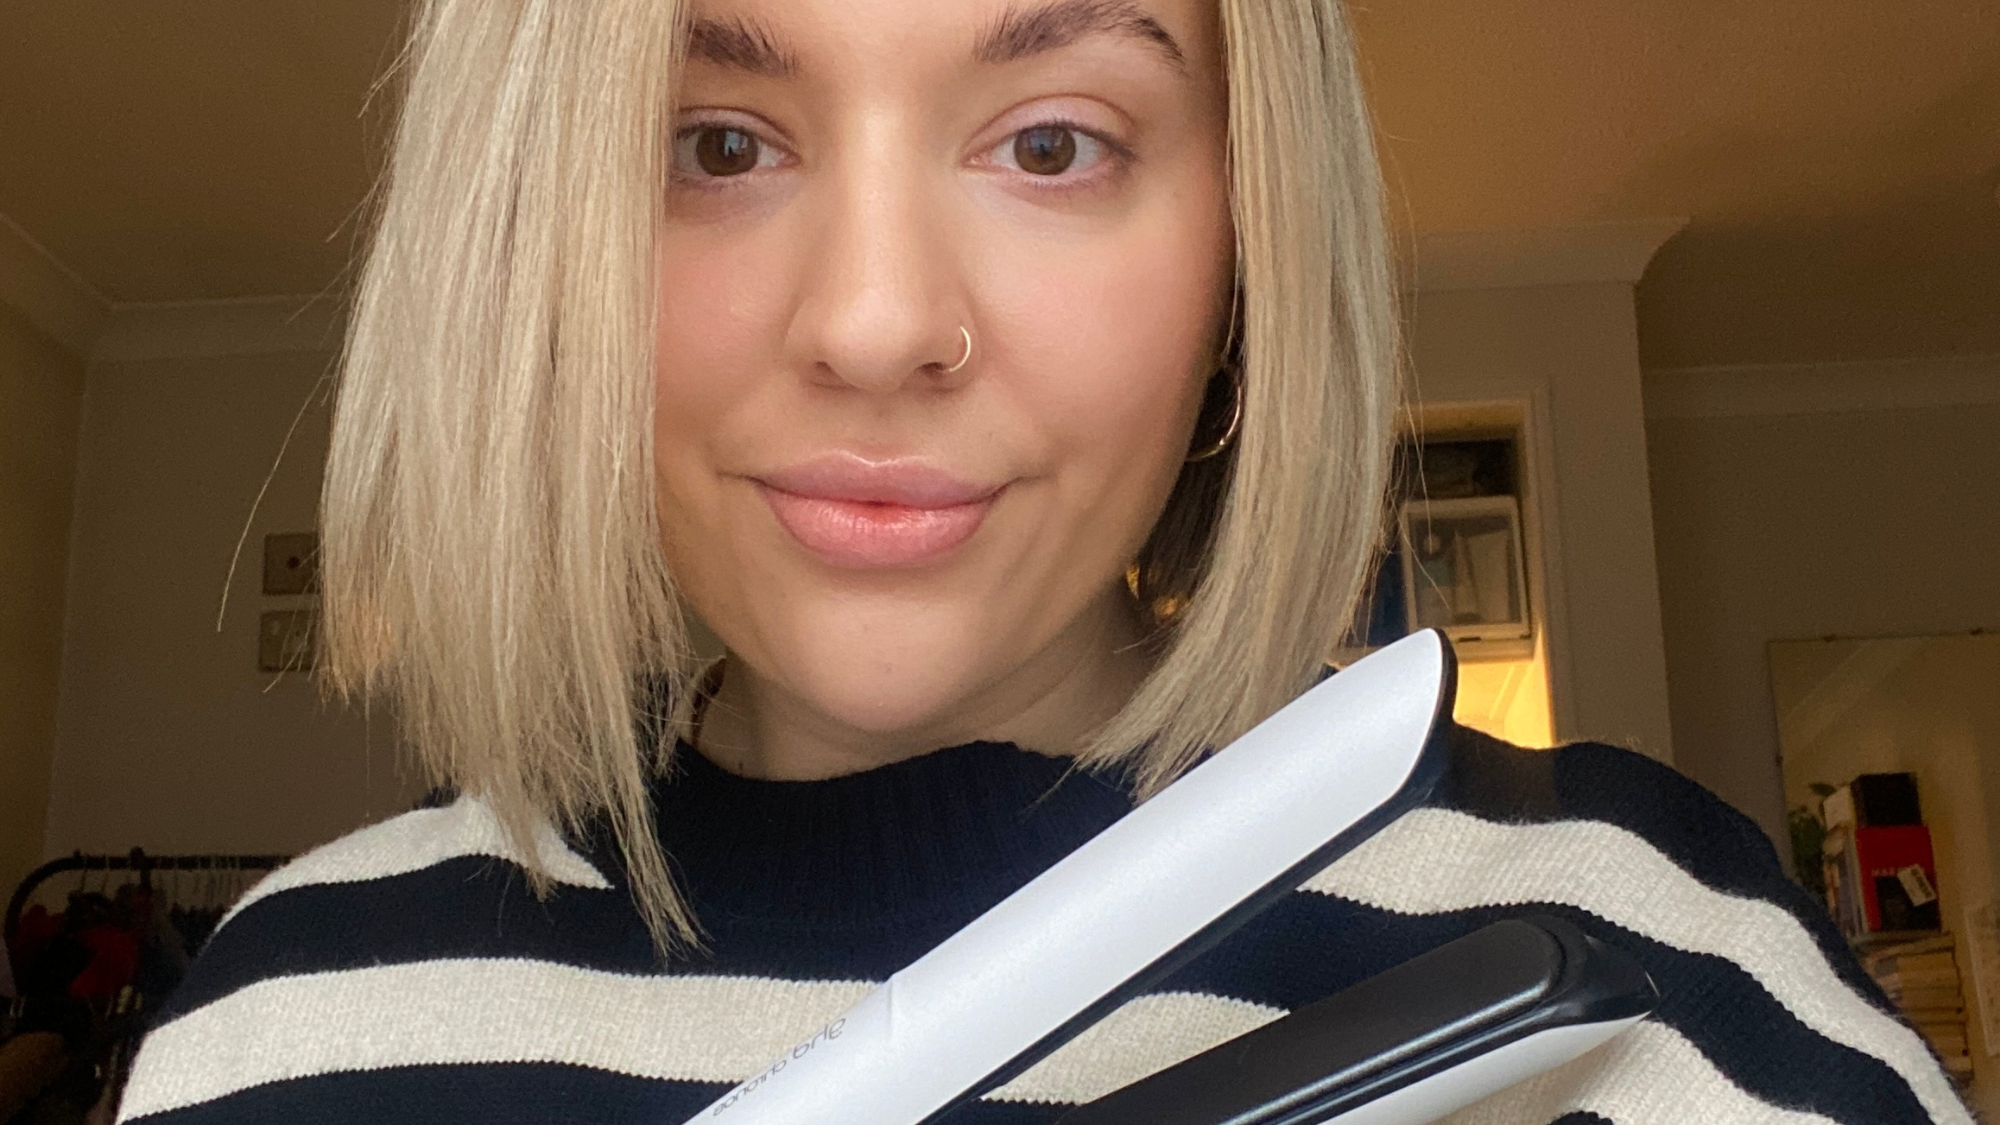 The ghd Chronos: 'I tried ghd's new styler that promises less frizz &  breakage - is it worth the price tag?